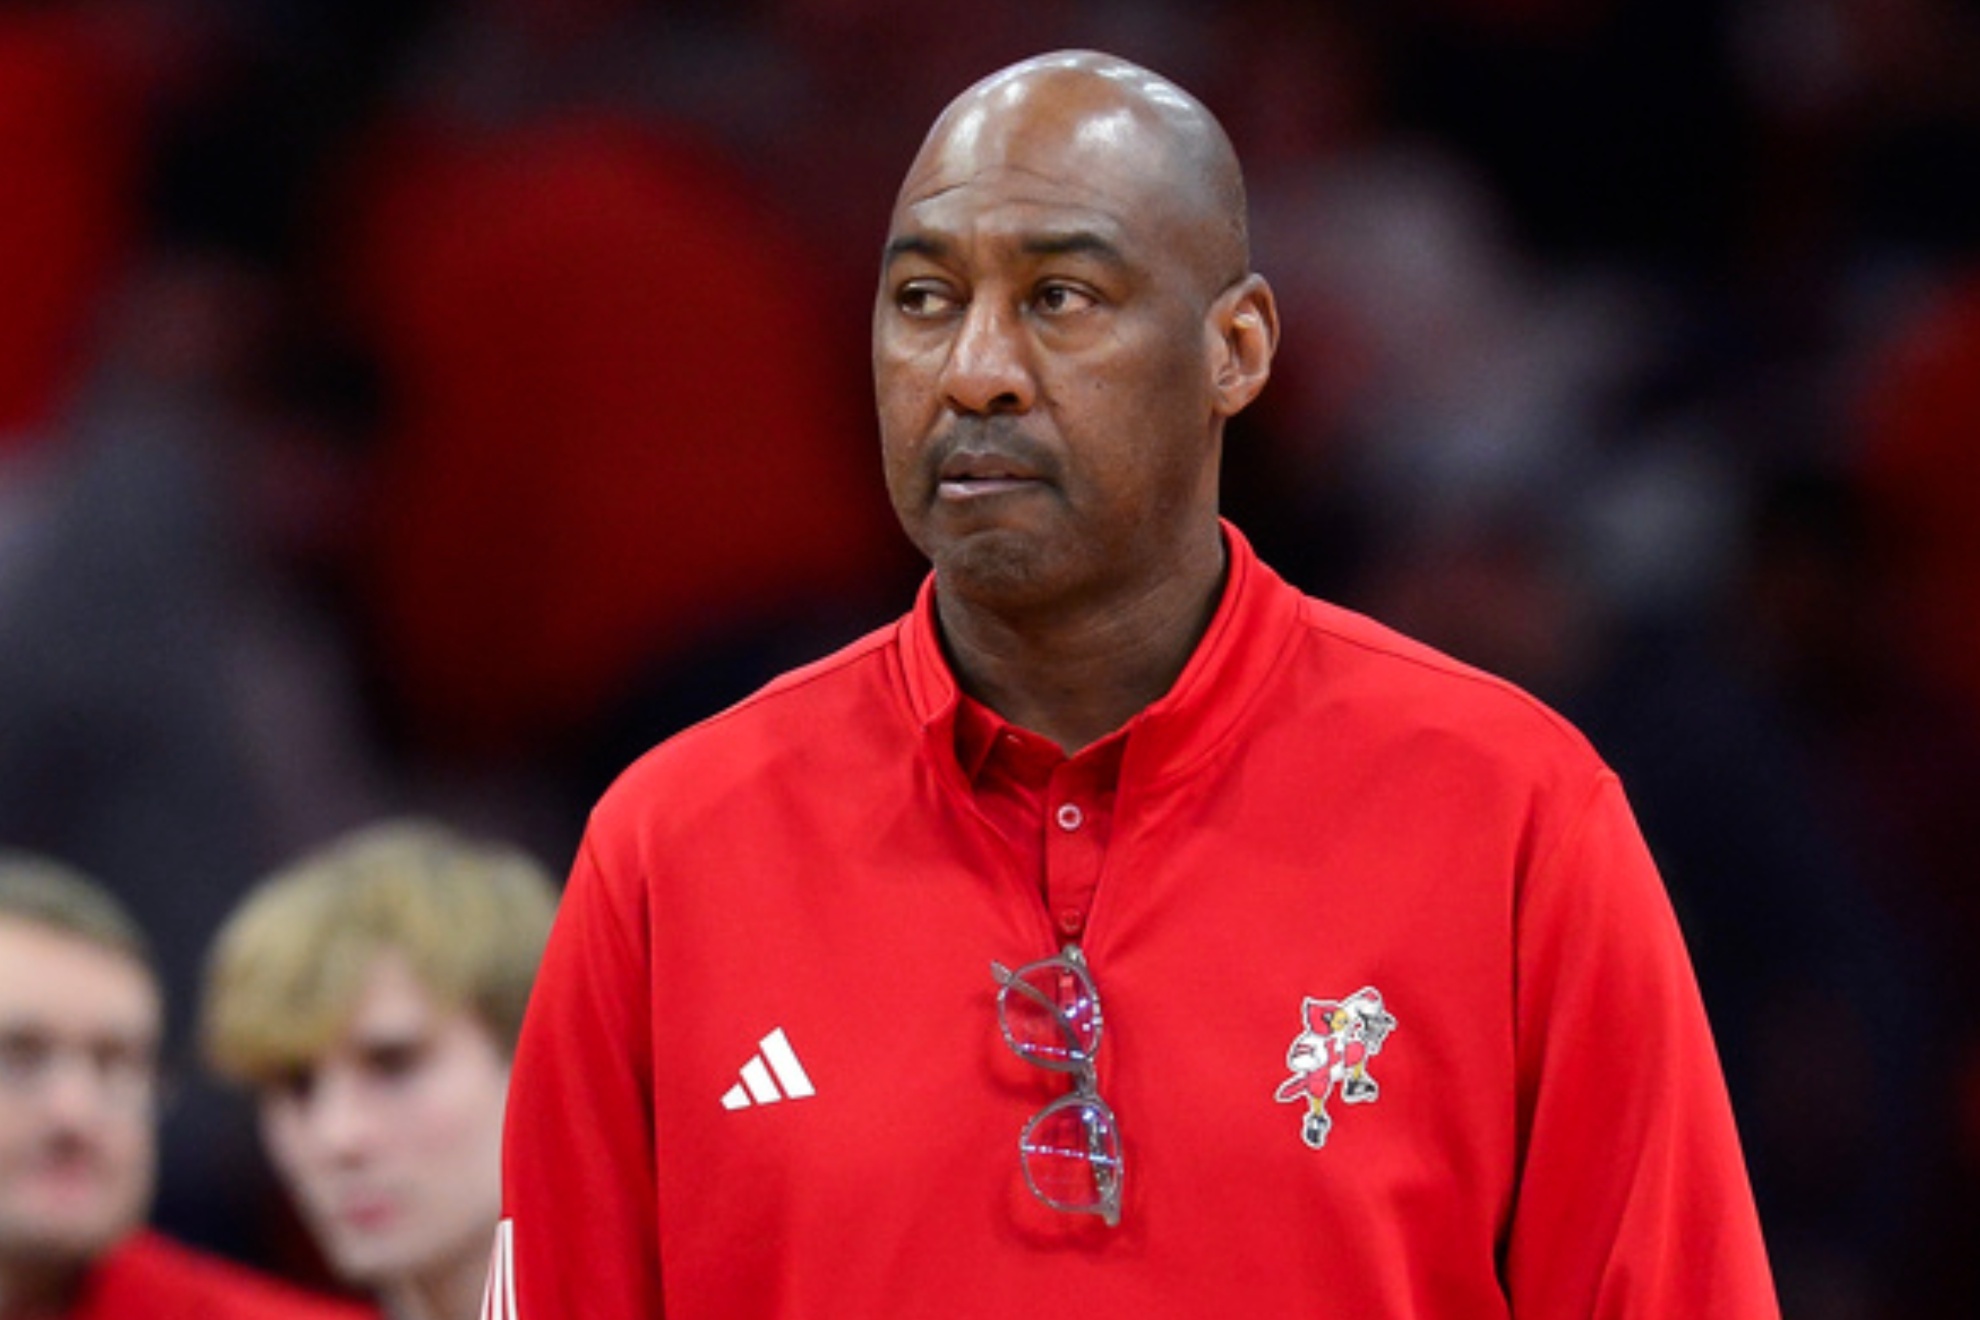 Danny Manning is a current assistant coach of the University of Louisville mens basketball team